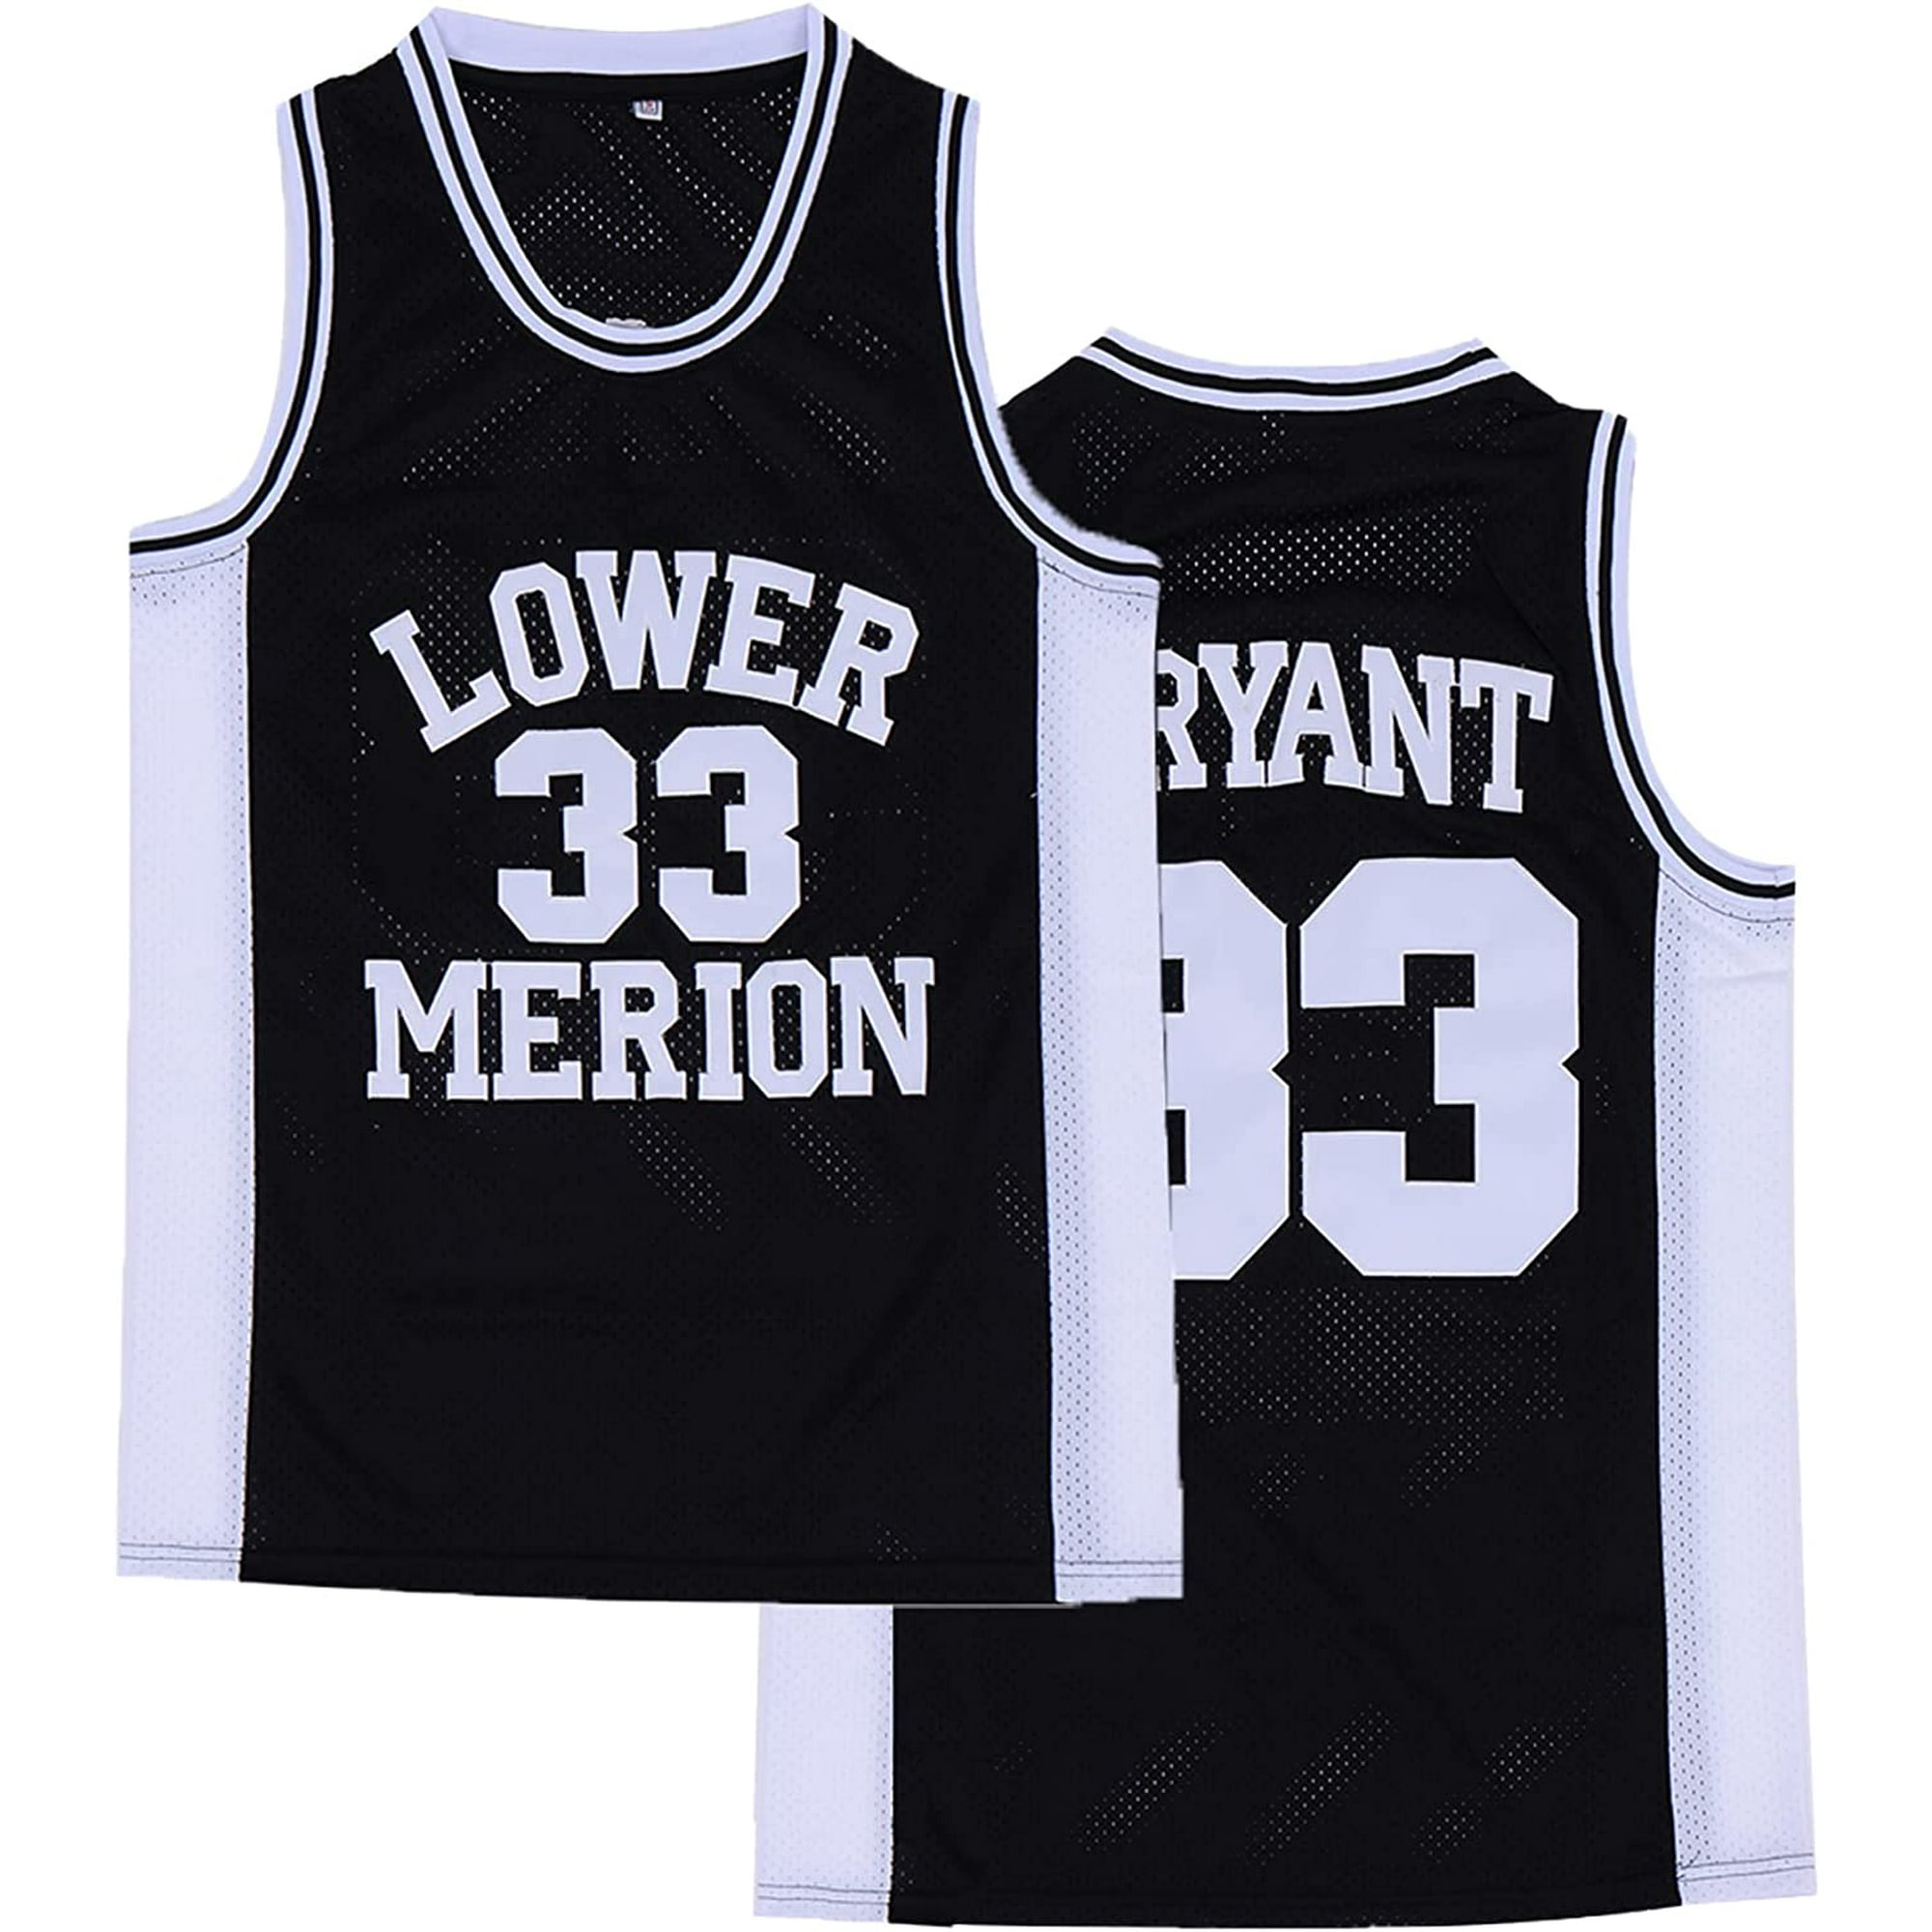 Your Team Lower Merion #33 Stitched Men's High School Basketball Jersey Black XL, Blue